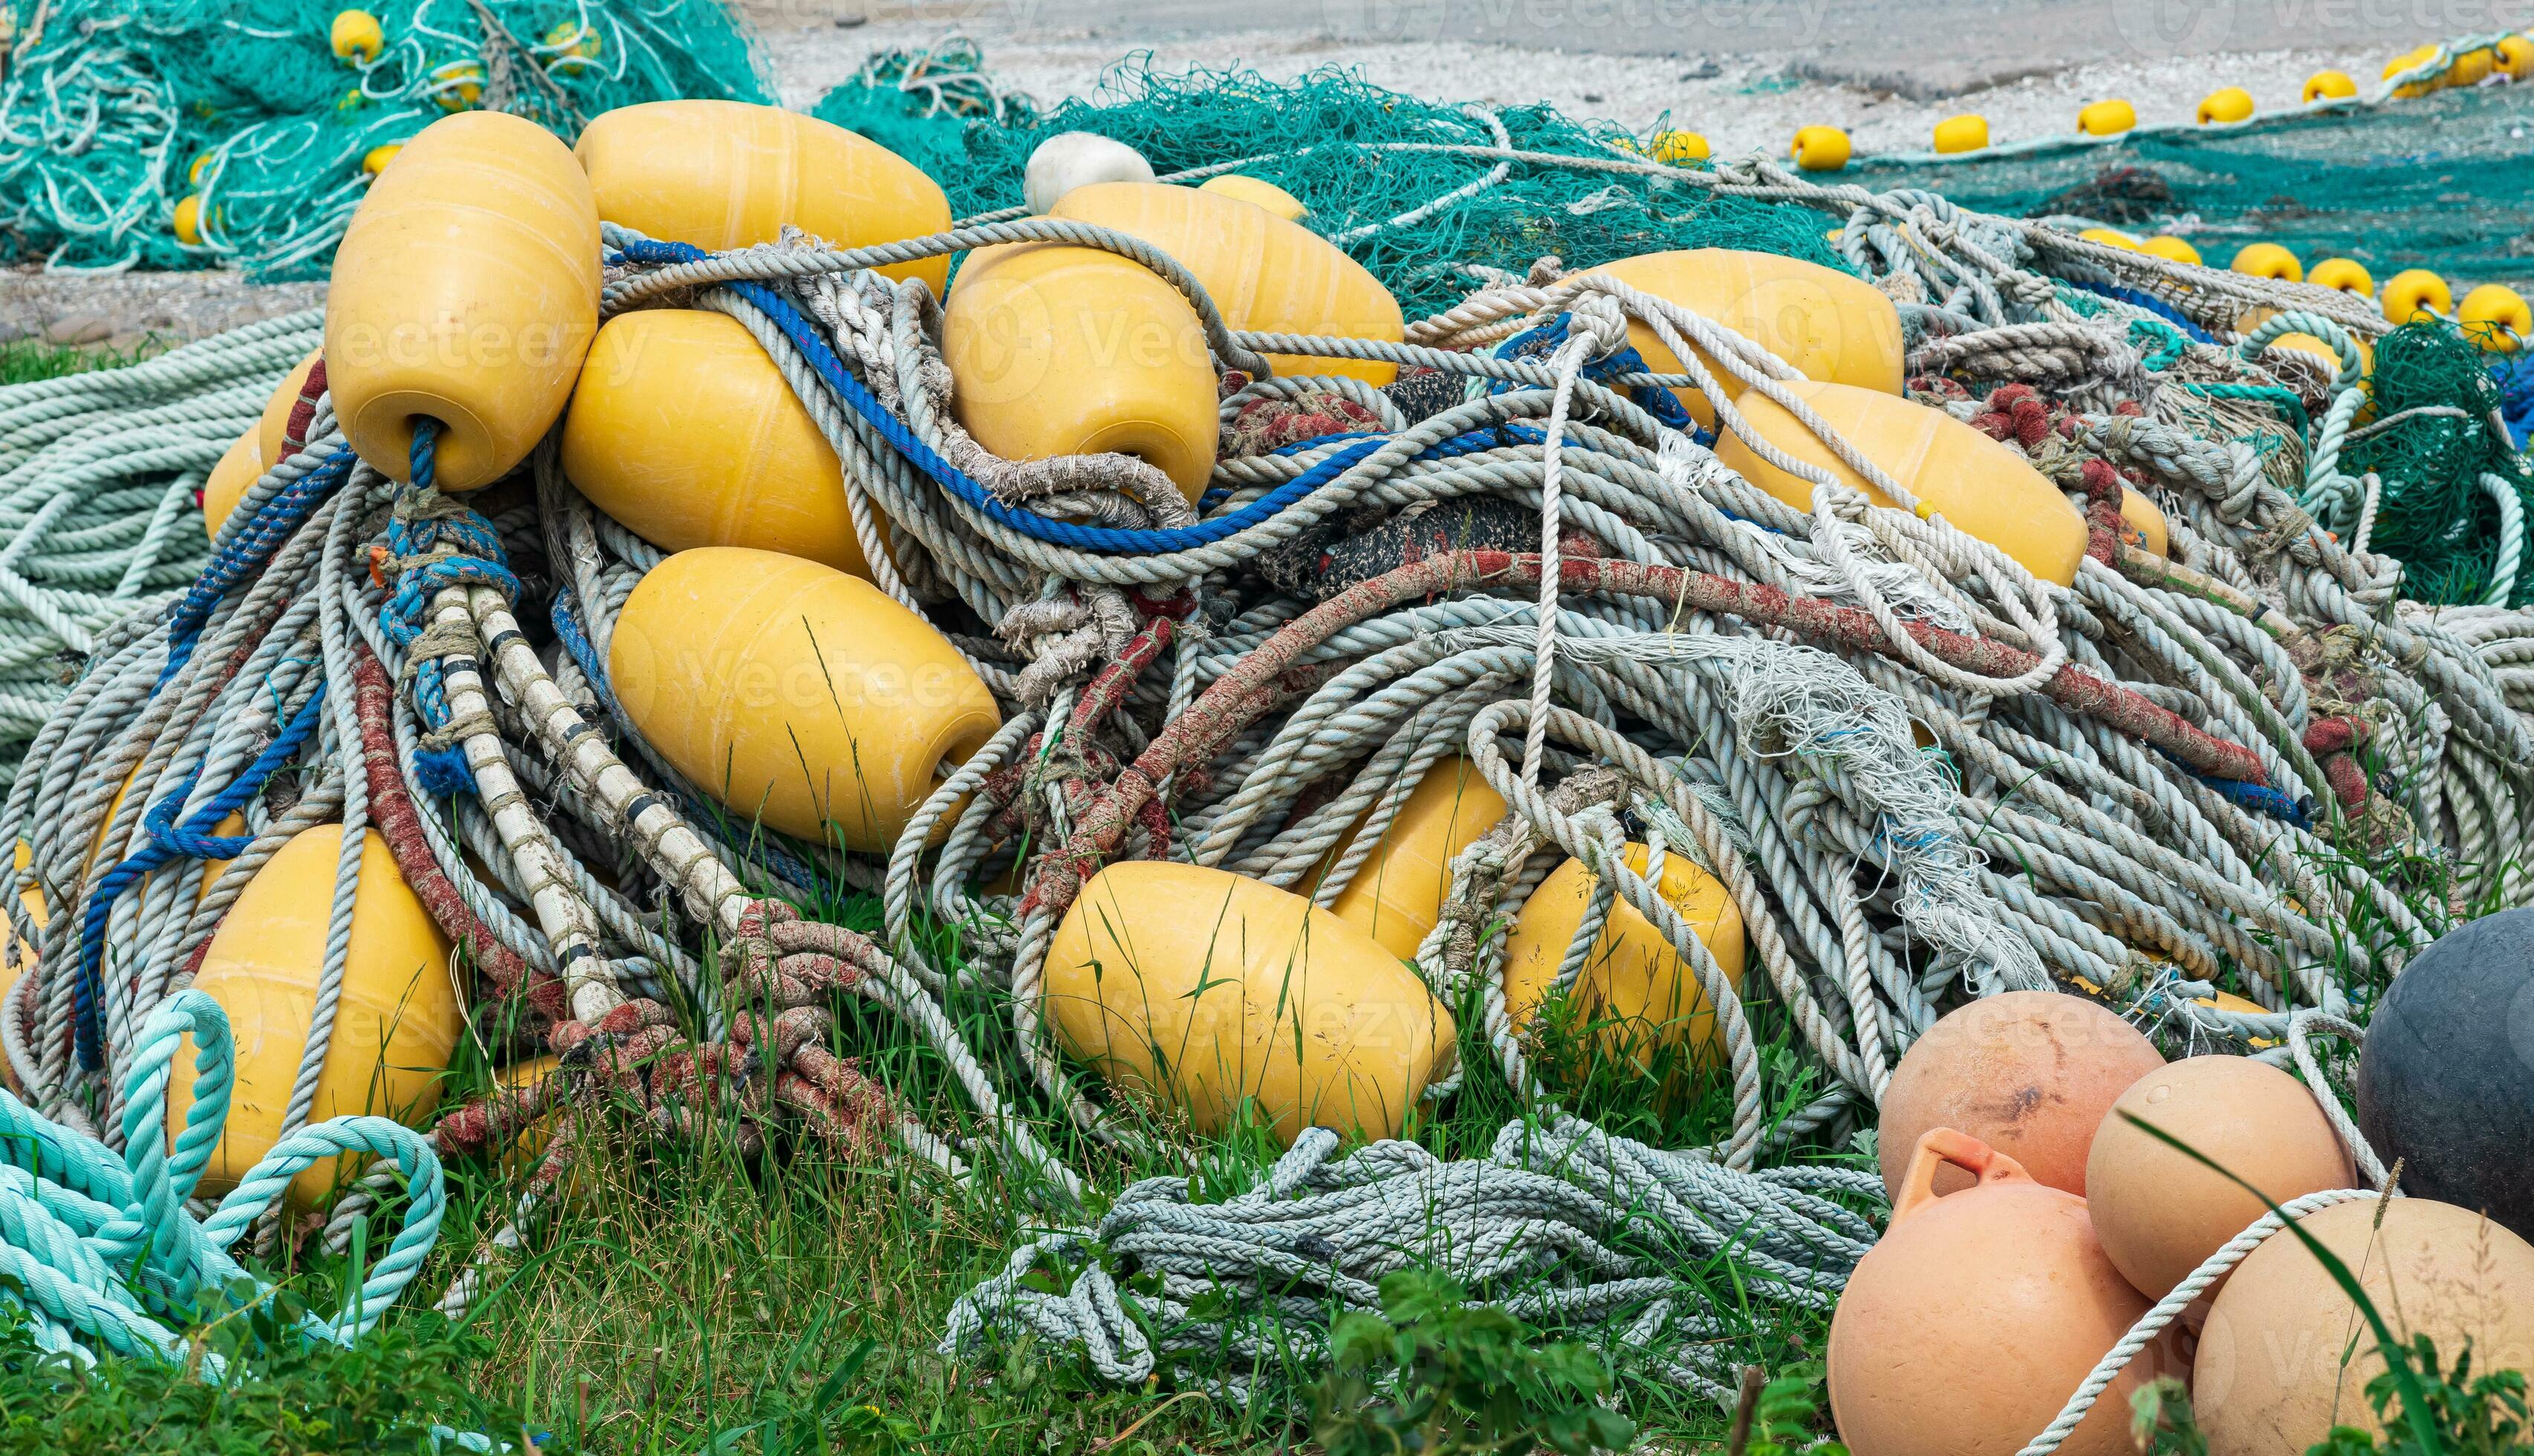 https://static.vecteezy.com/system/resources/previews/035/870/861/large_2x/industrial-fishing-nets-with-bright-floats-is-folded-ashore-photo.jpg